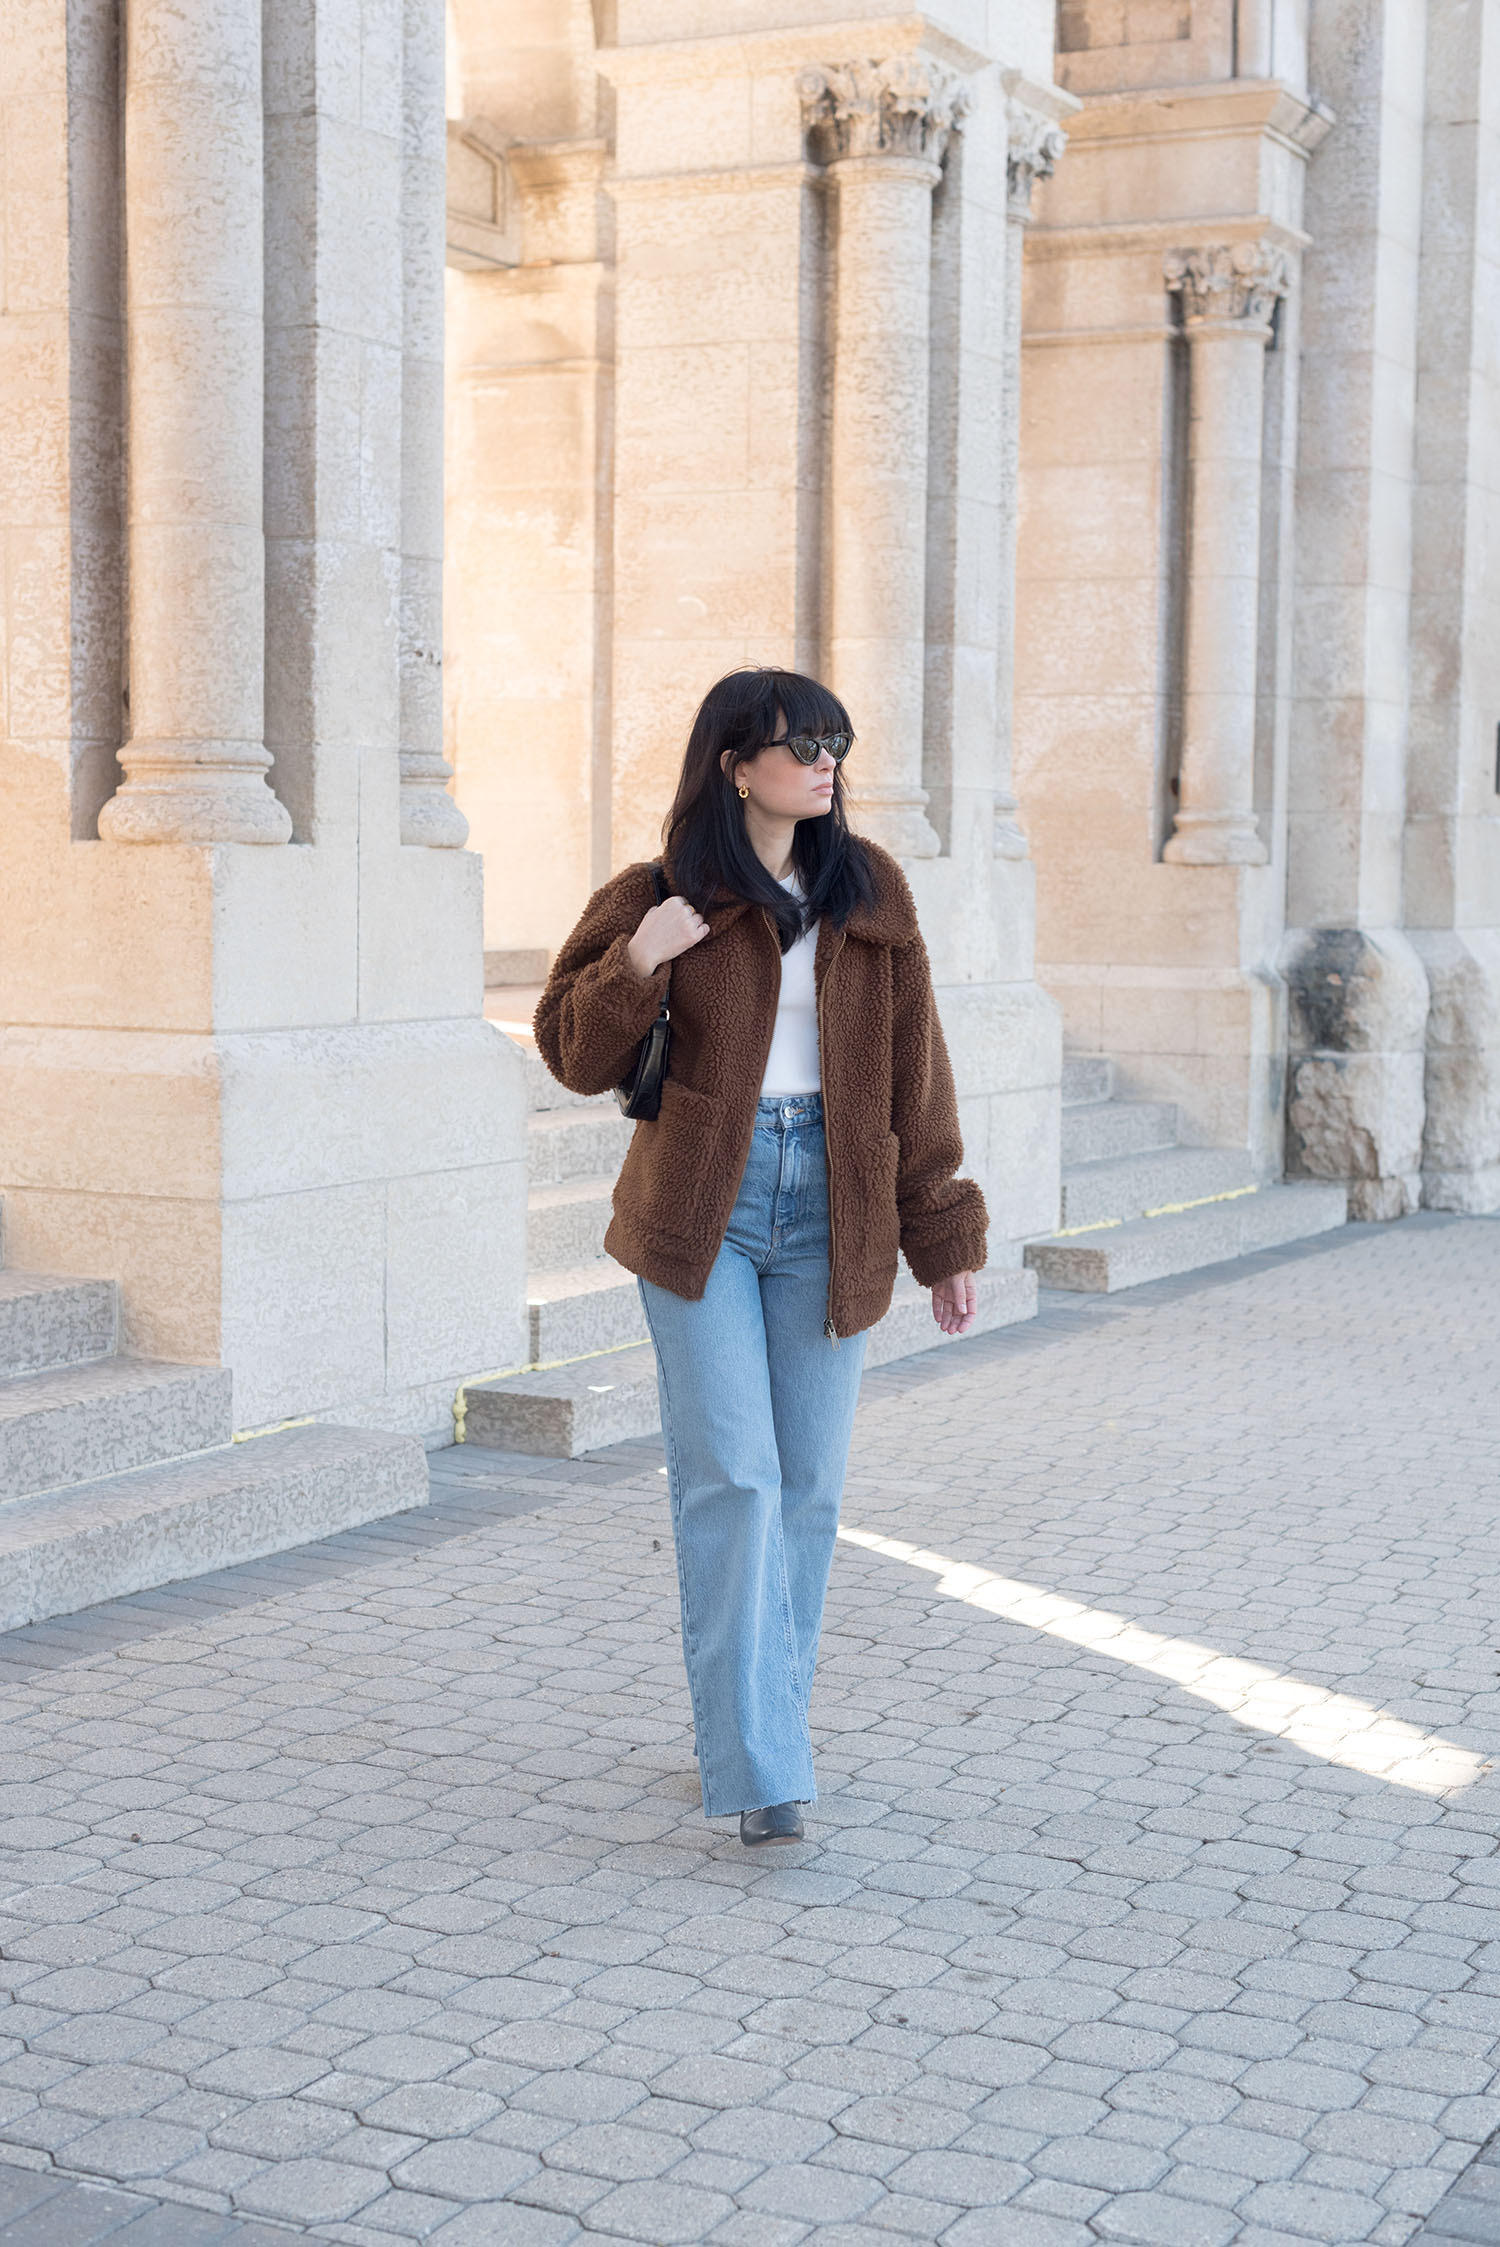 https://www.cocoandvera.com/wp-content/uploads/2021/04/coco-and-vera-best-winnipeg-fashion-blog-best-canadian-fashion-blog-top-blogger-street-style-zara-jeans-rouje-boots.jpg